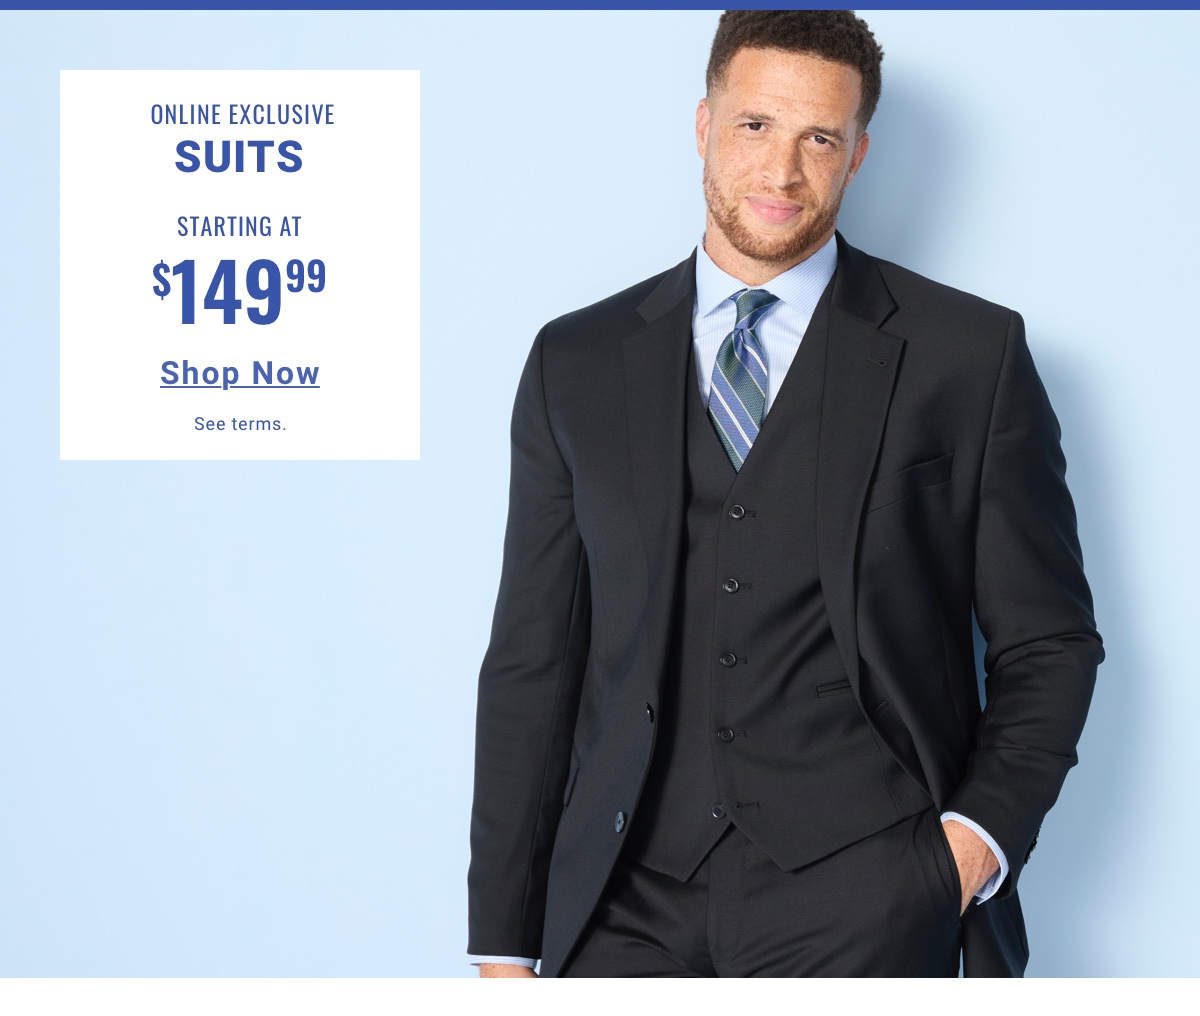 Online Exclusive Suits Starting at $149.99